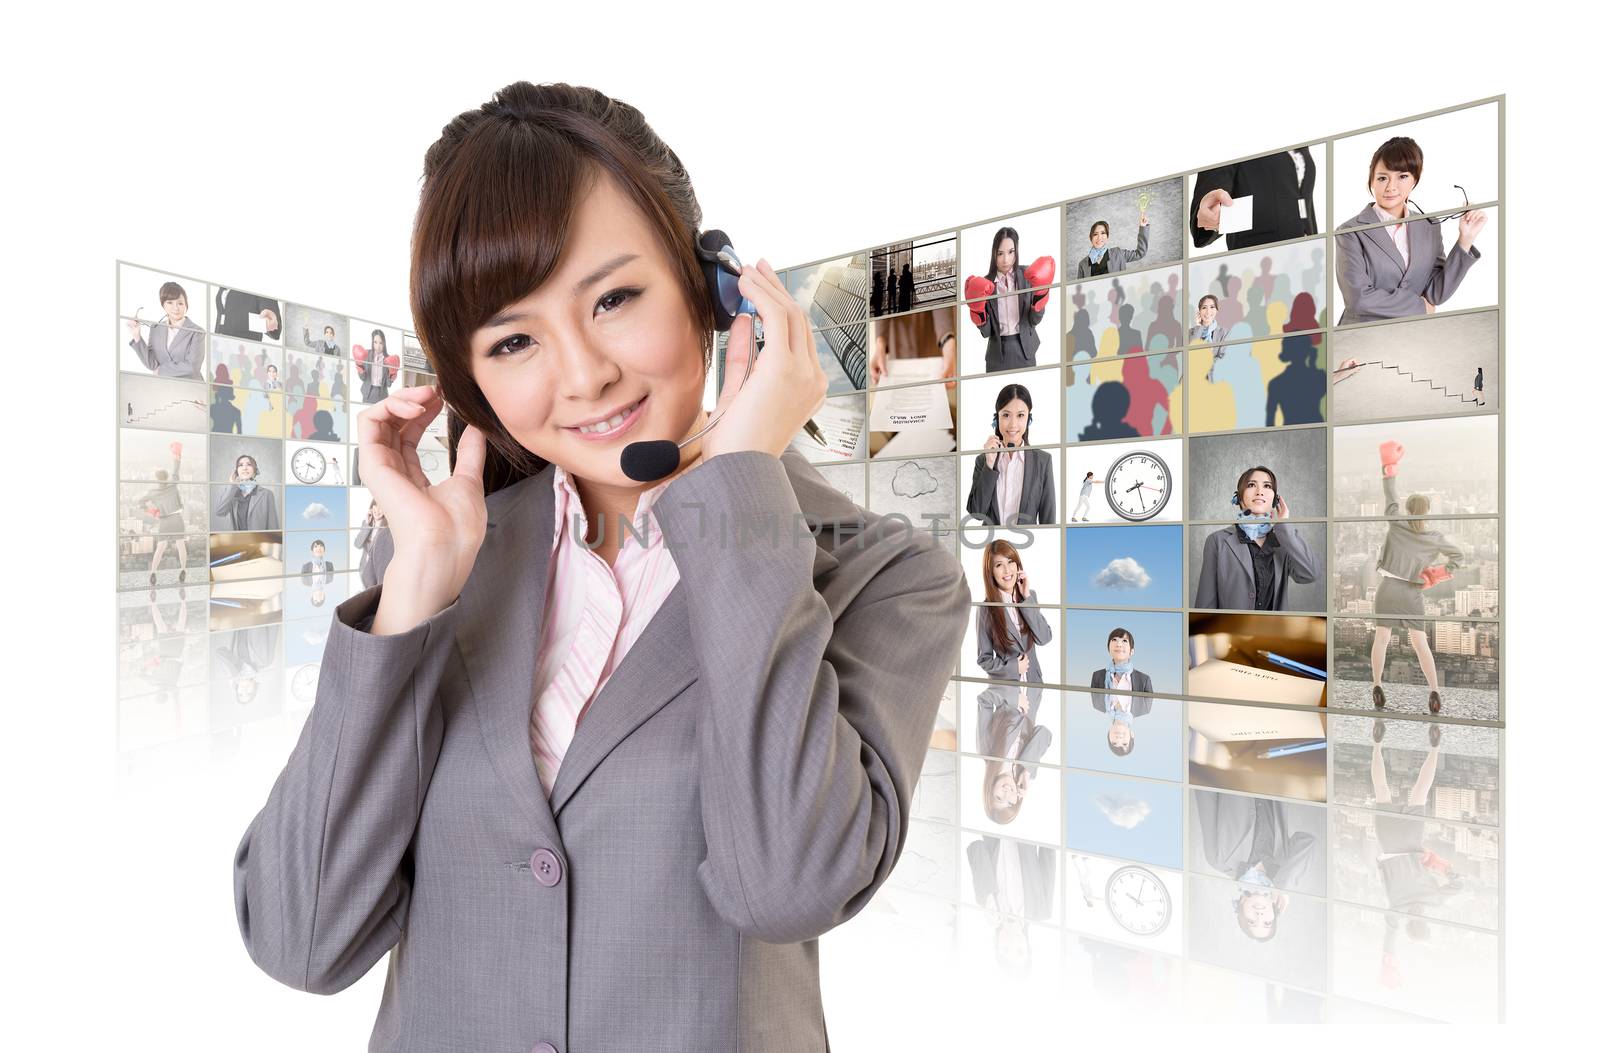 Business woman with headphone standing in front of TV screen wall.